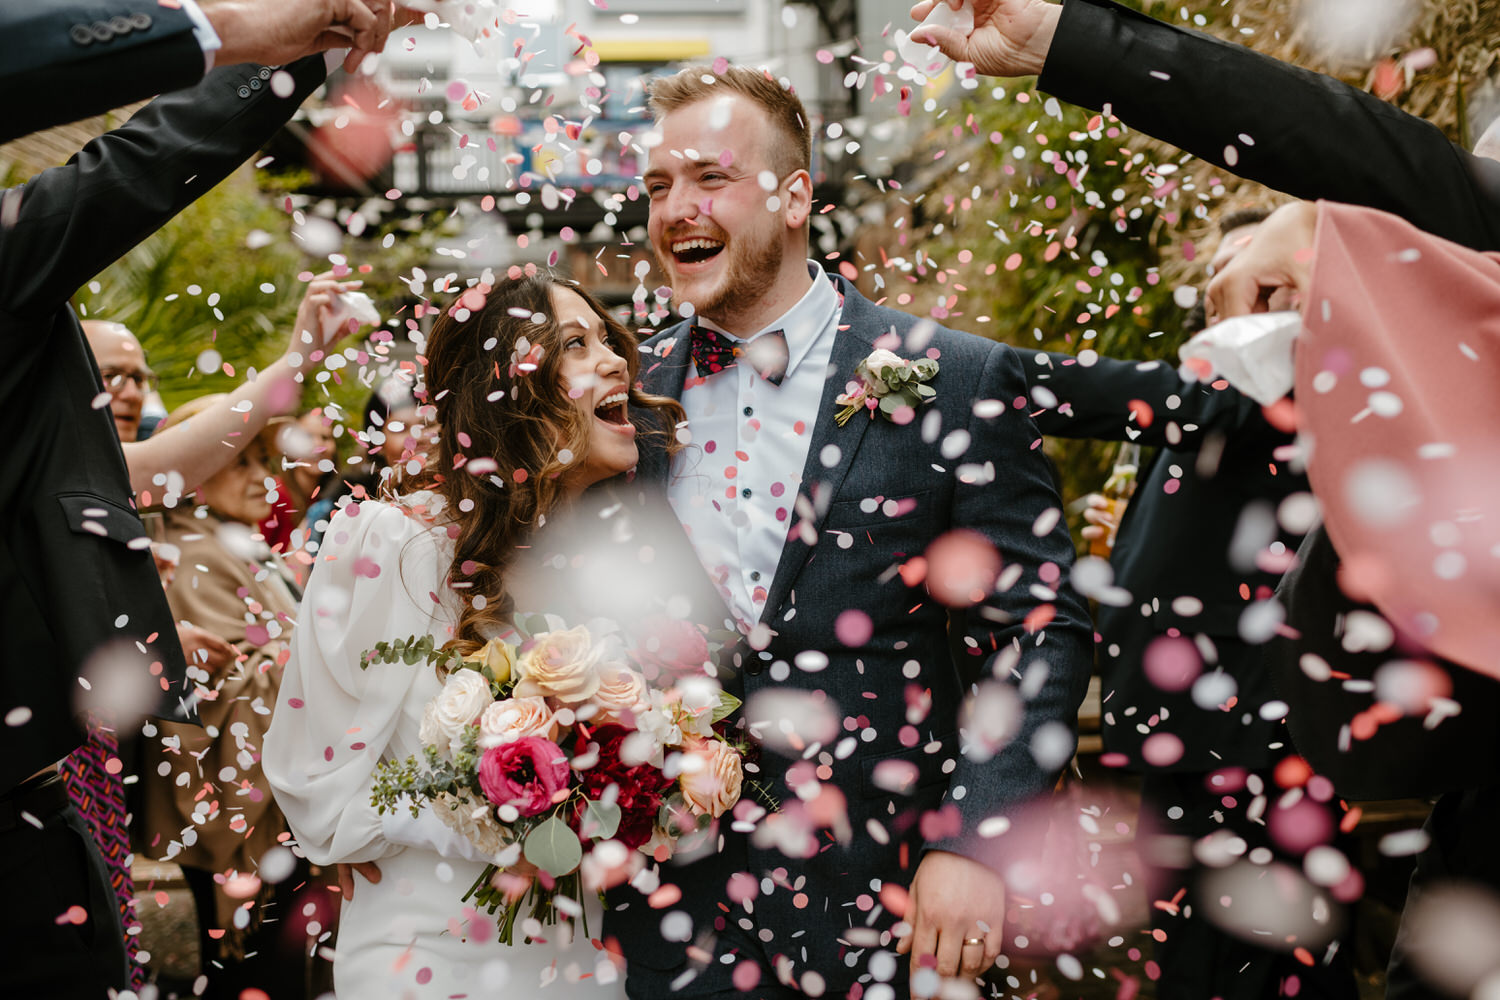 Joyful and colourful confetti shot of a bride and groom. She's wearing a long sleeved, minimal and vintage style white dress and he's in a blue suit and white shirt with a bowtie. By London wedding photographer Ellie Gillard